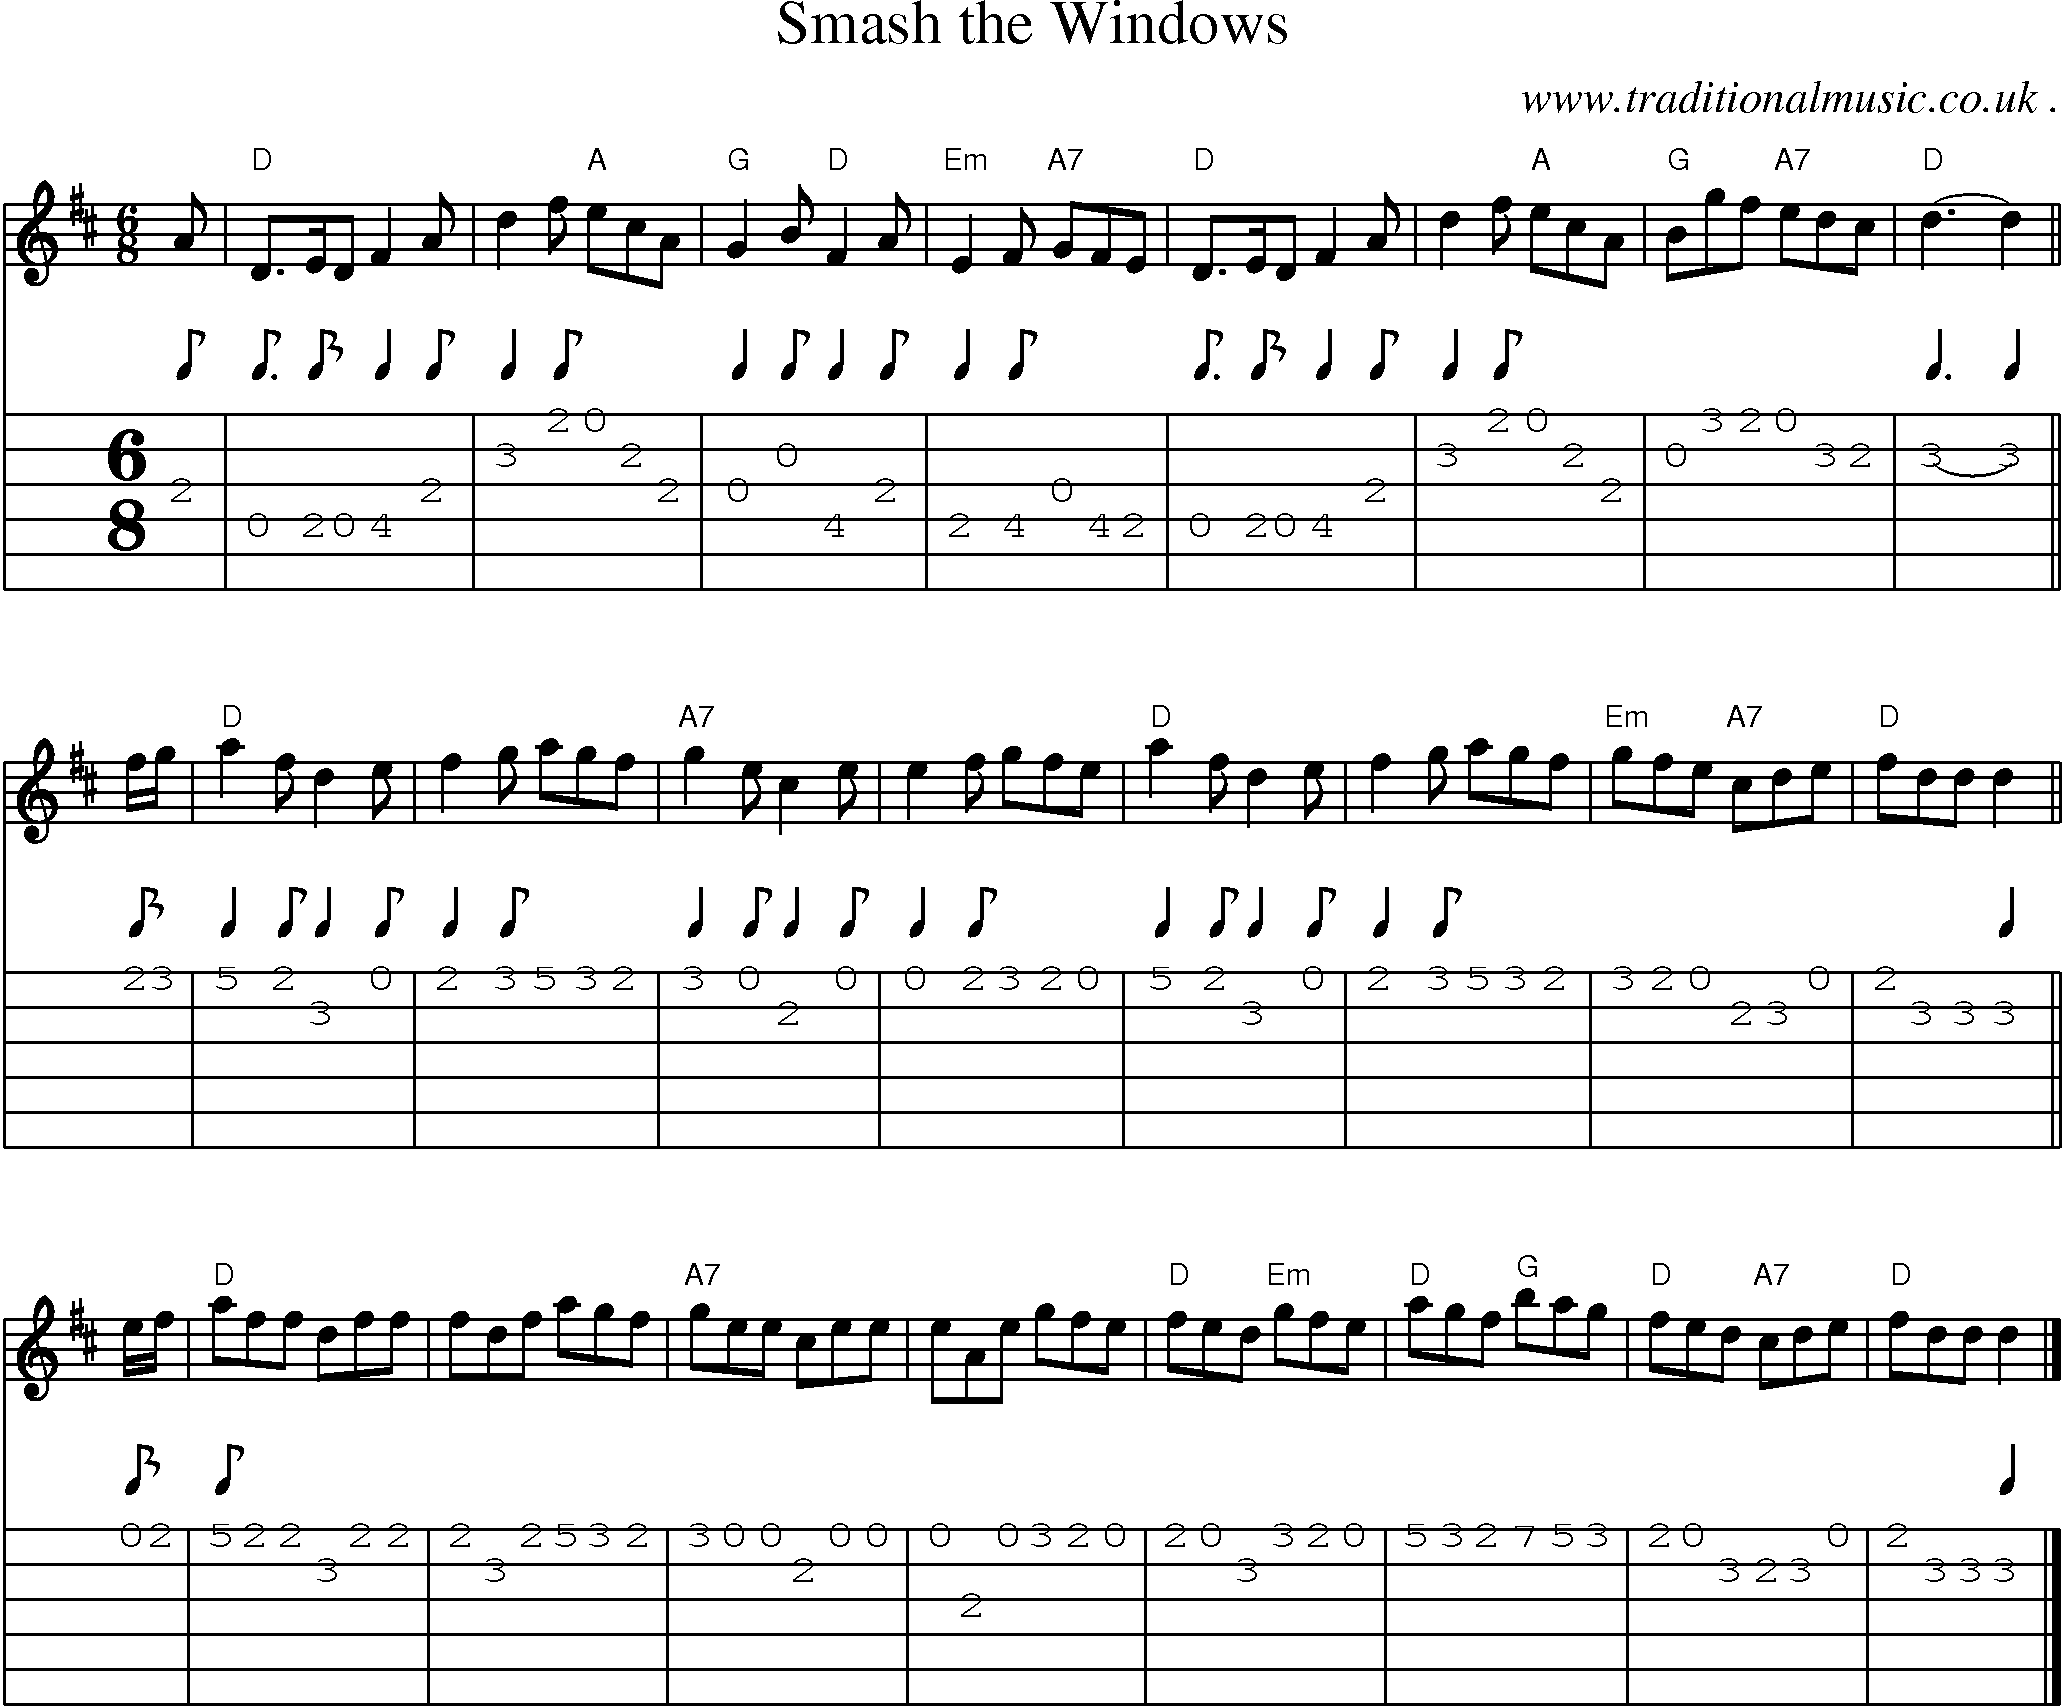 Sheet-music  score, Chords and Guitar Tabs for Smash The Windows